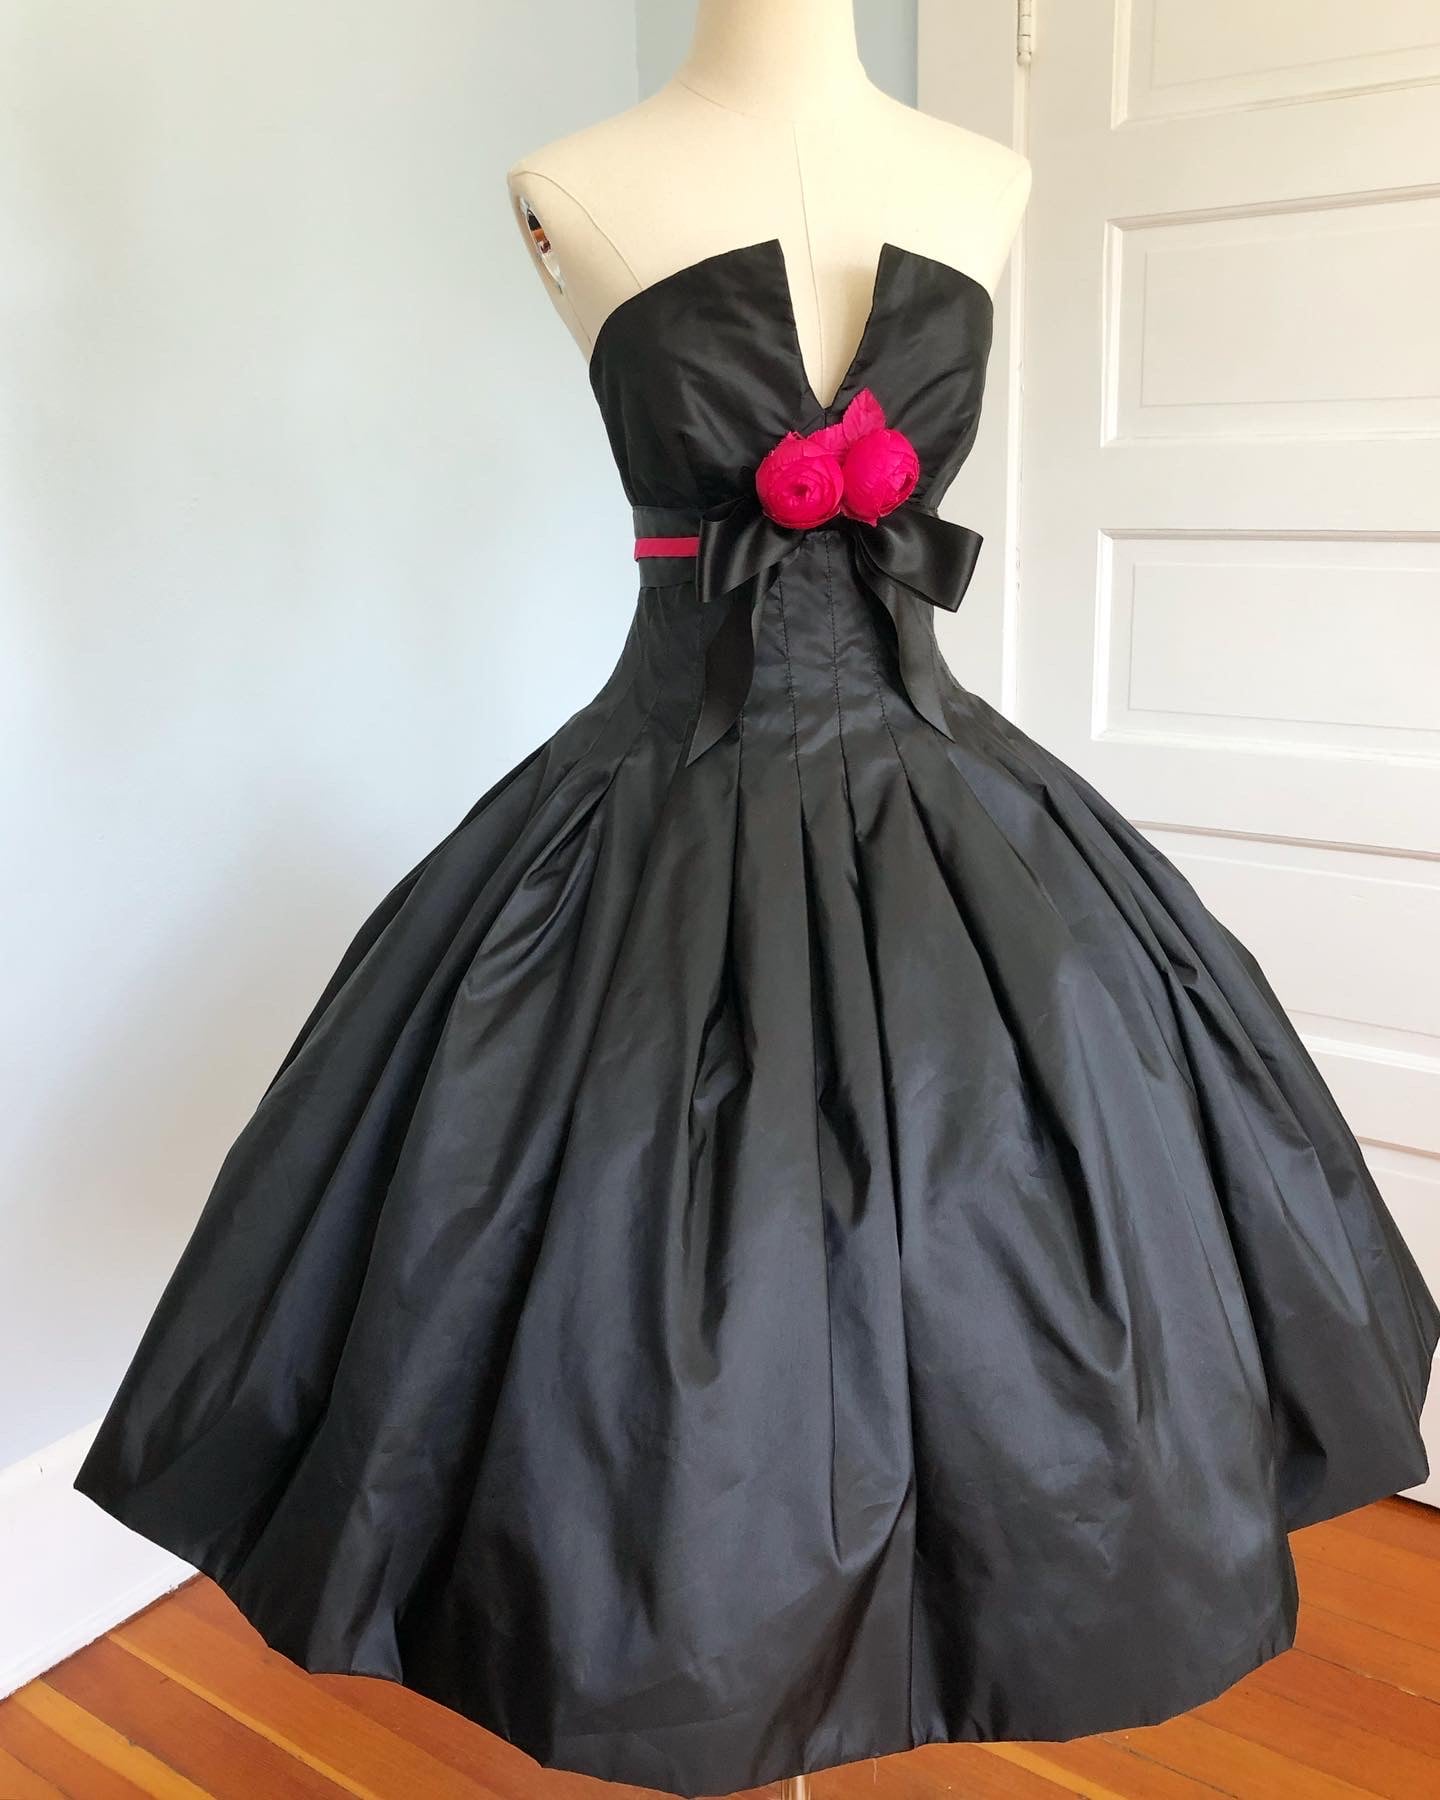 1980s does 1950s Taffeta Structured Party Dress by "Victor Costa for Bergdorf Goodman on The Plaza, New York"